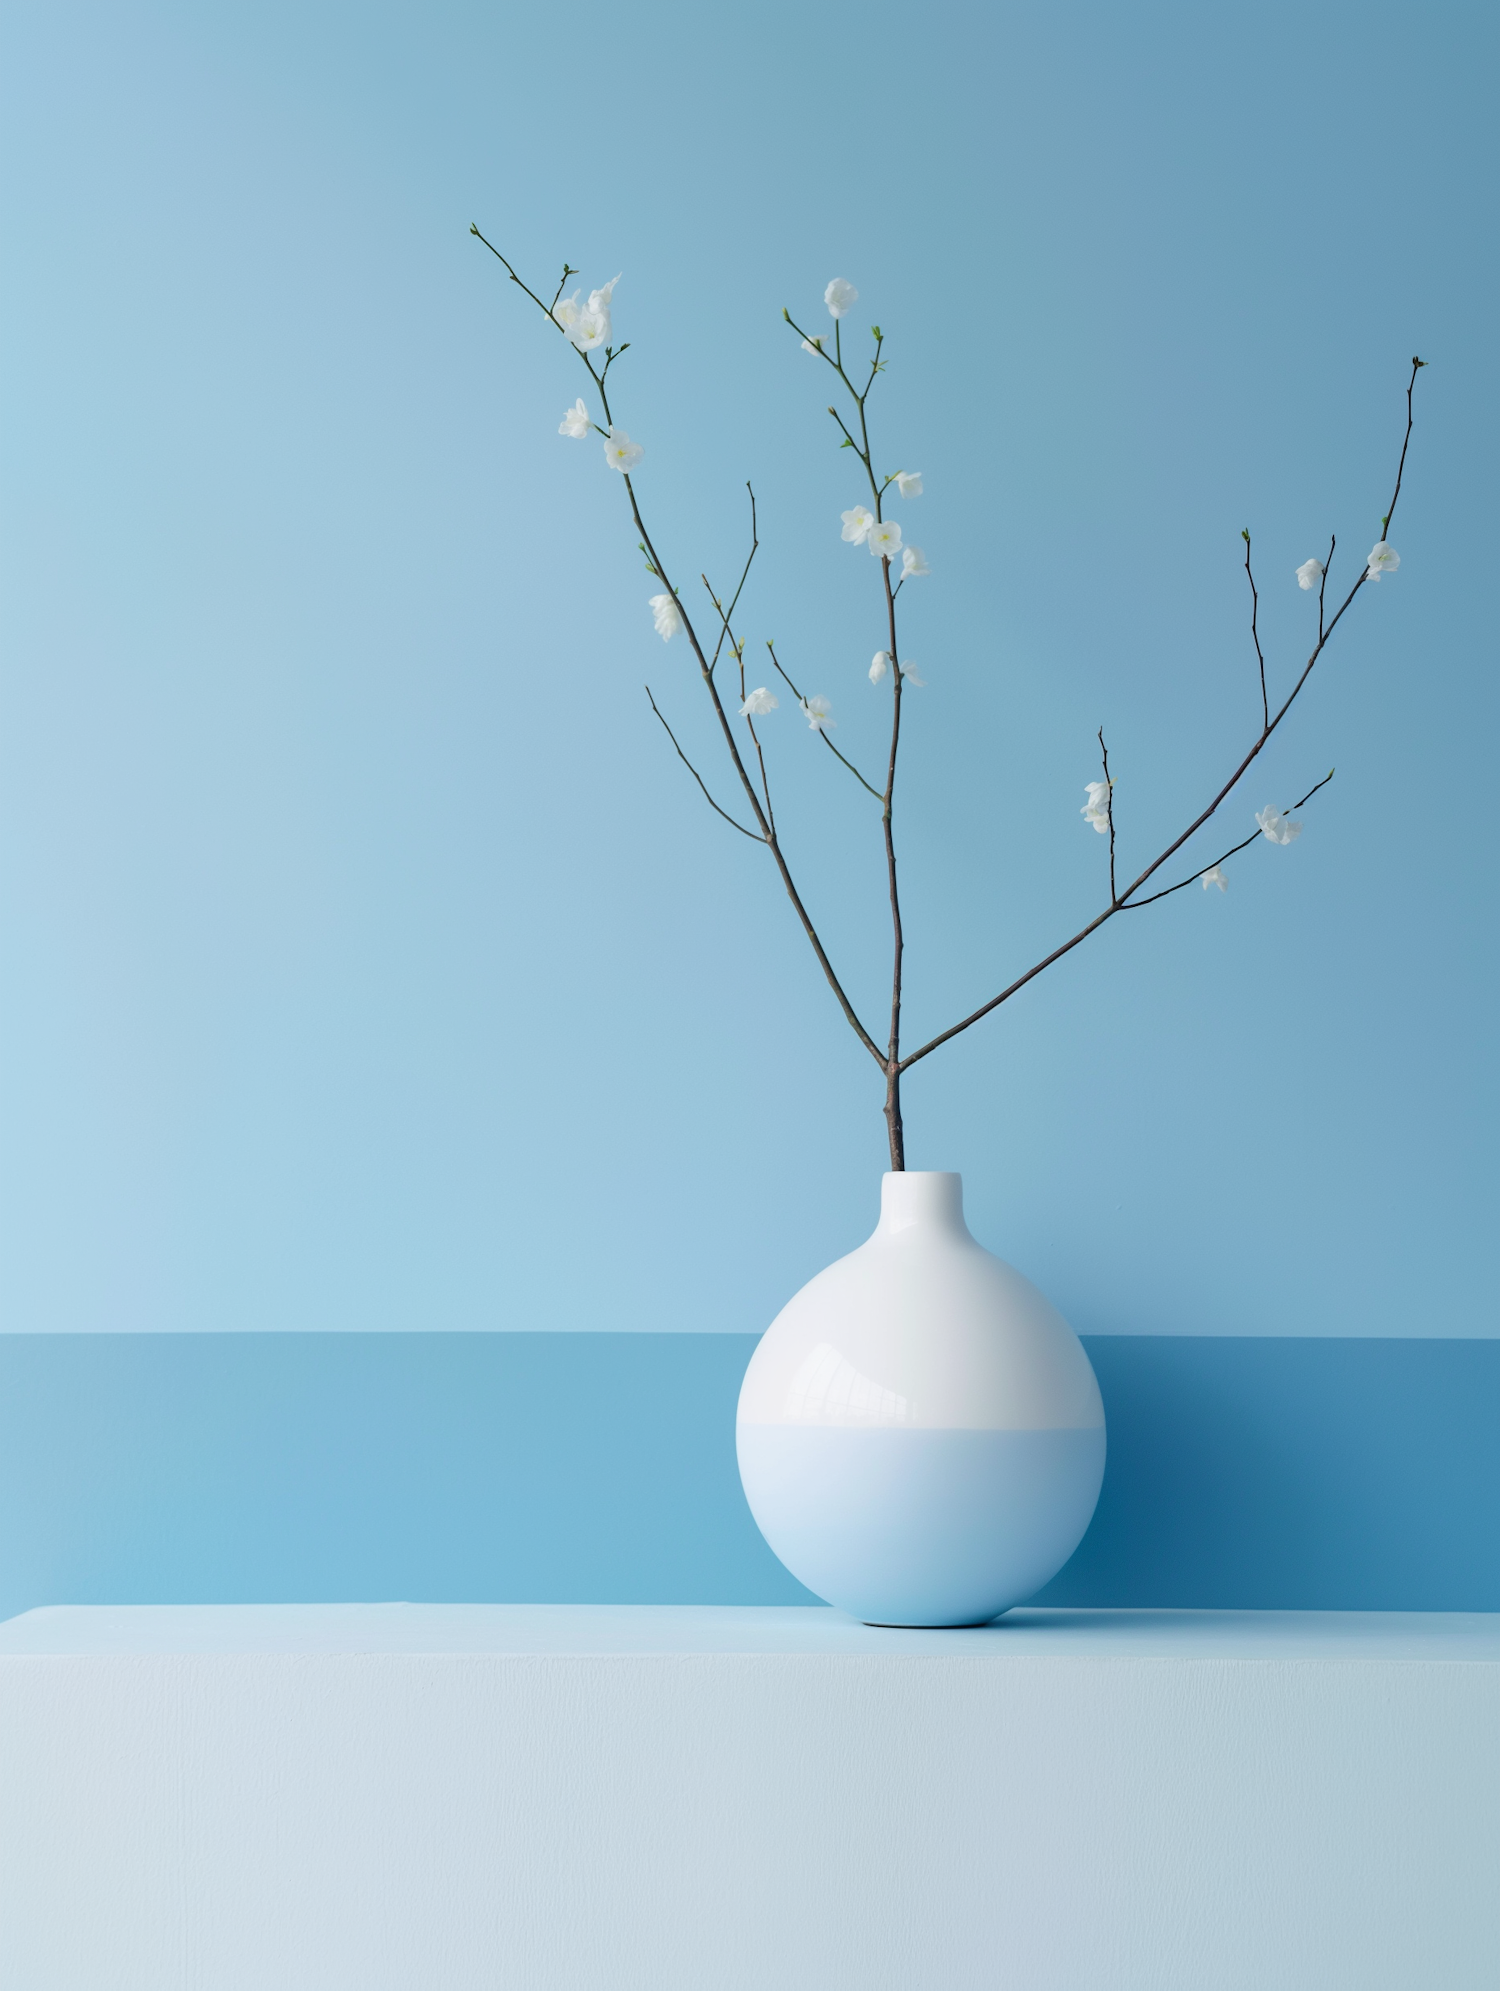 Minimalist Blue Vase with White Blossoms